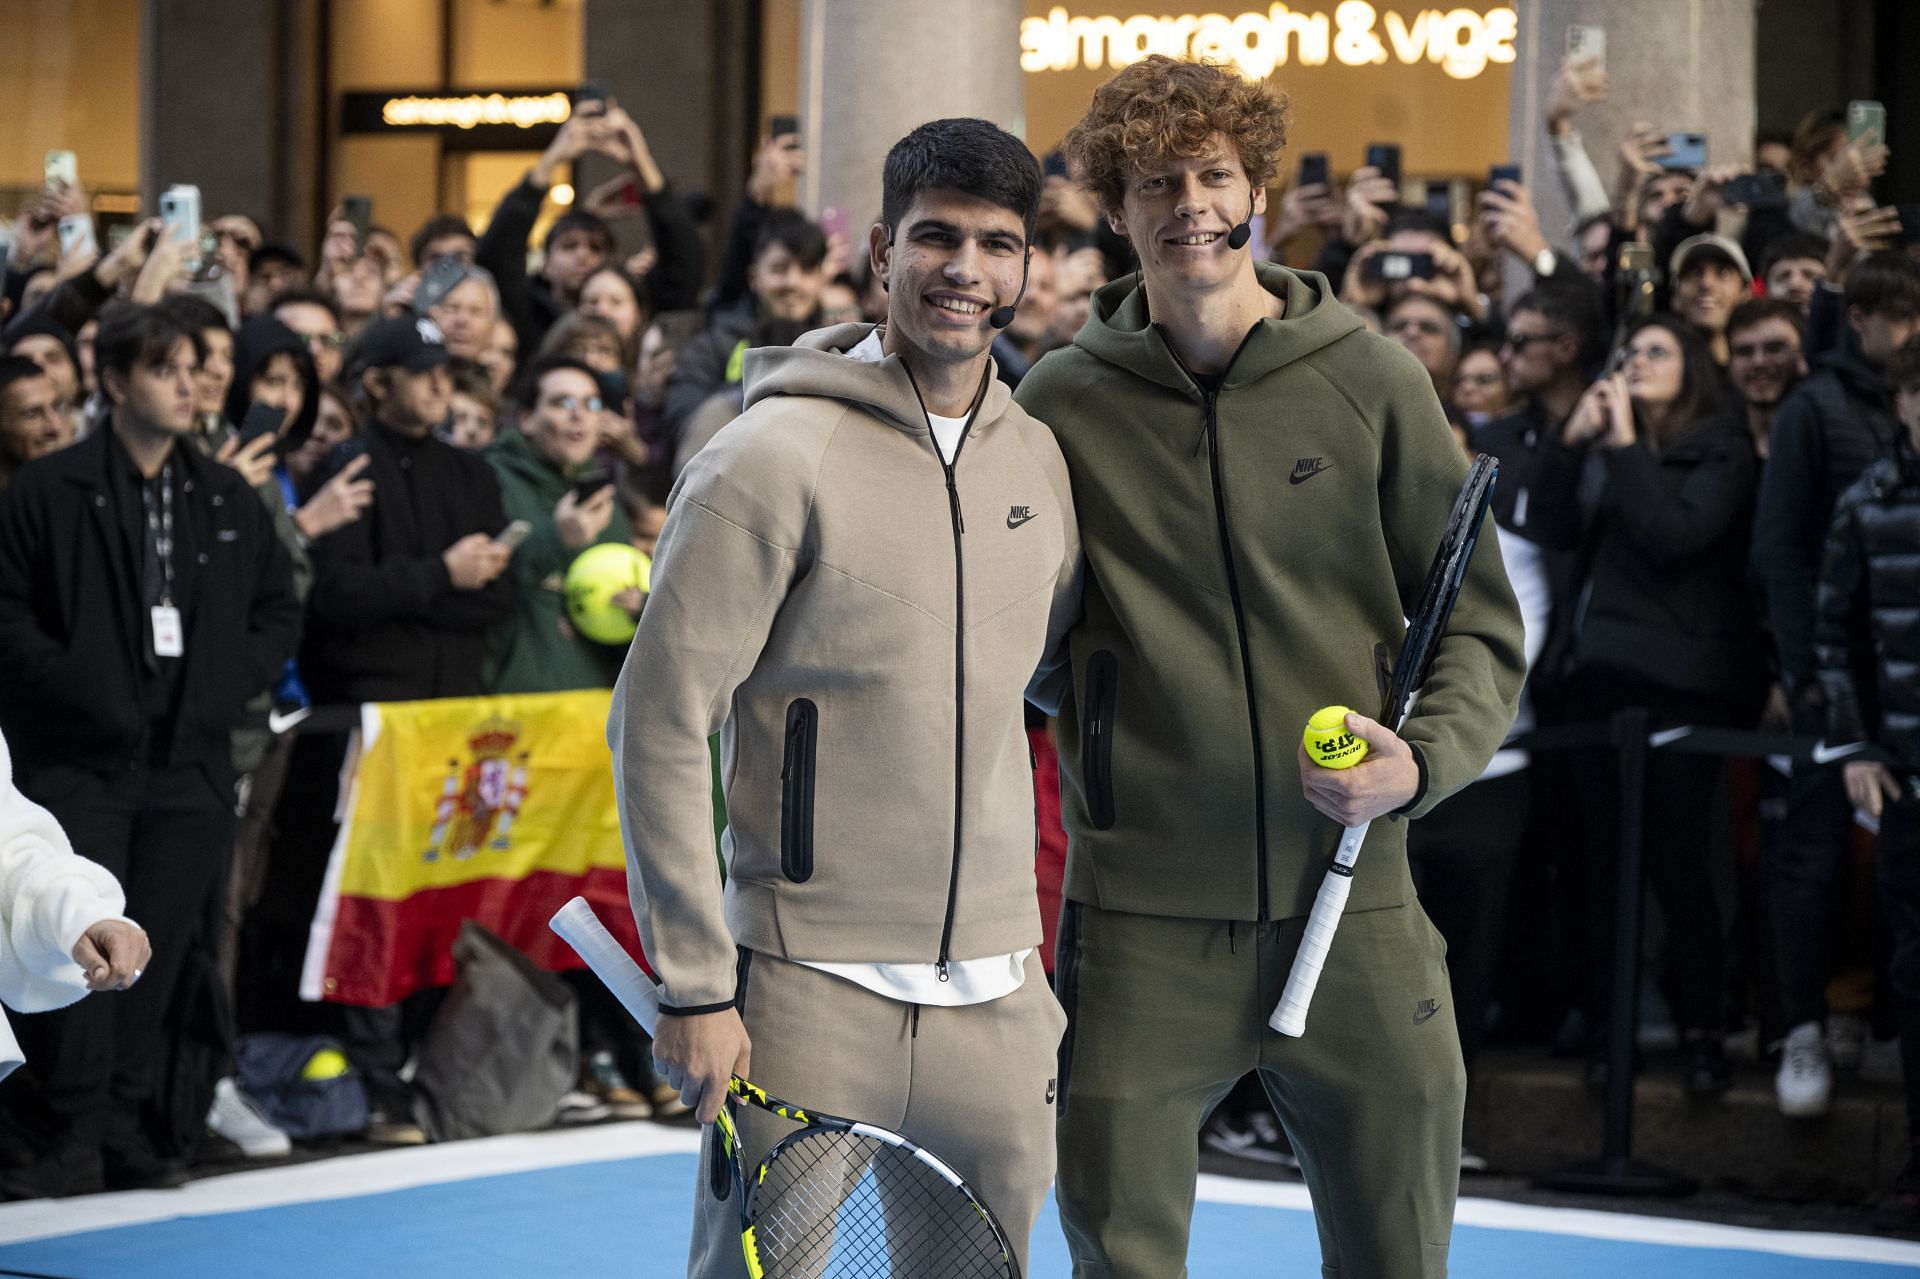 Carlos Alcaraz (L) and Jannik Sinner (R) at a promotional event in Turin during the 2023 Nitto ATP Finals